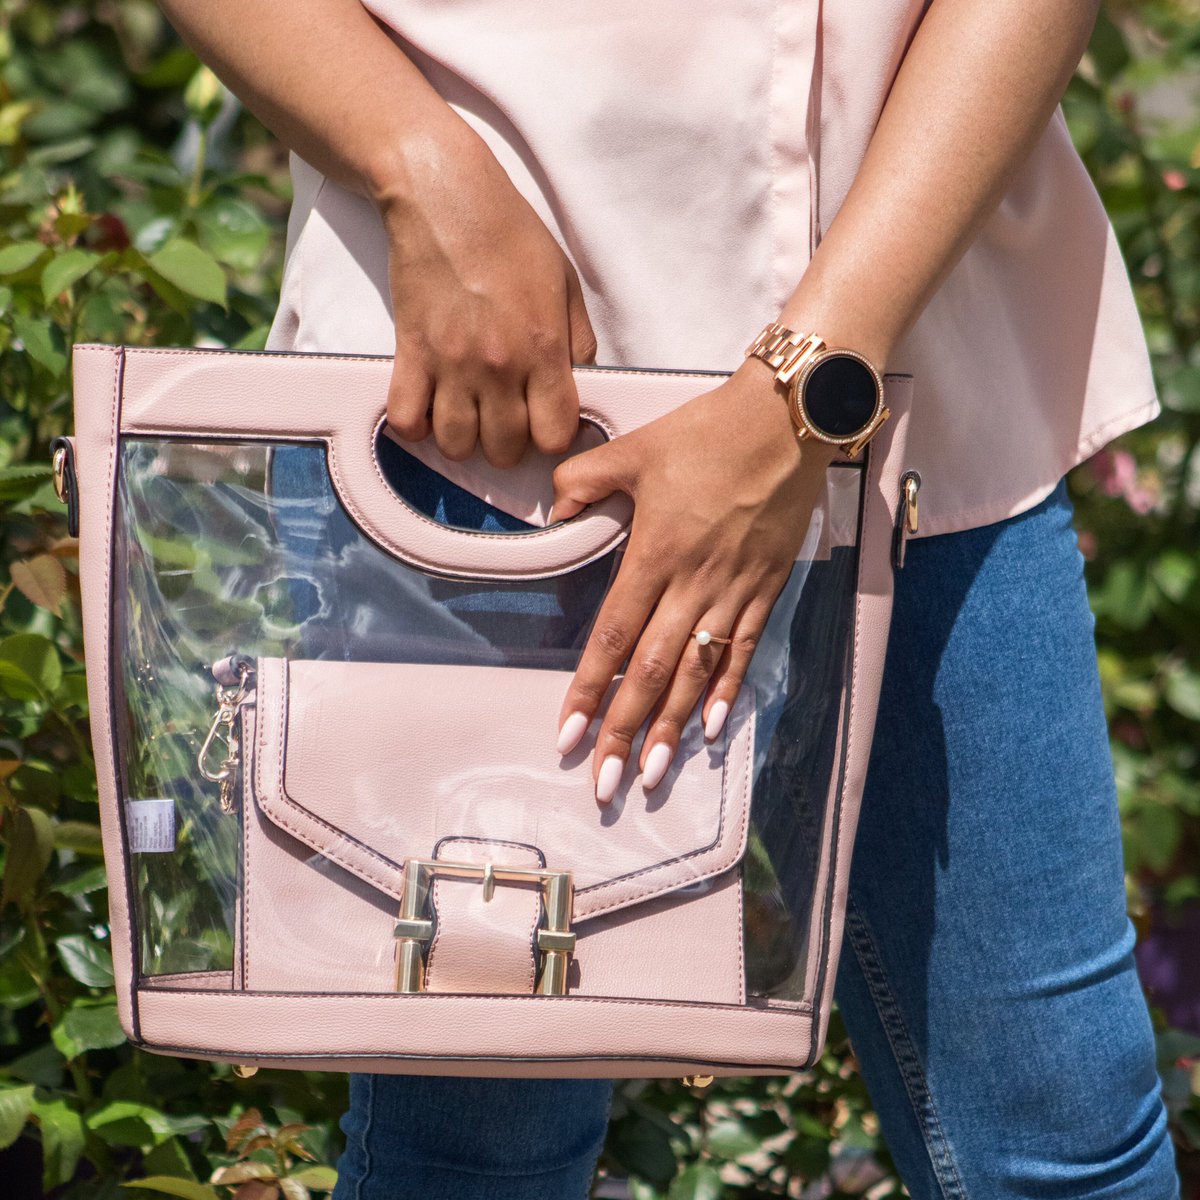 Love this bag? Head on over to the blog and see how how you can style it THREE different ways 💕 beautifulencountersxo.com/2019/07/03/the…
•
•
•
#newblogpost #summerfashion #summerstyle #styleblogger #clearhandbag #pinkhandbag #versatilehandbag